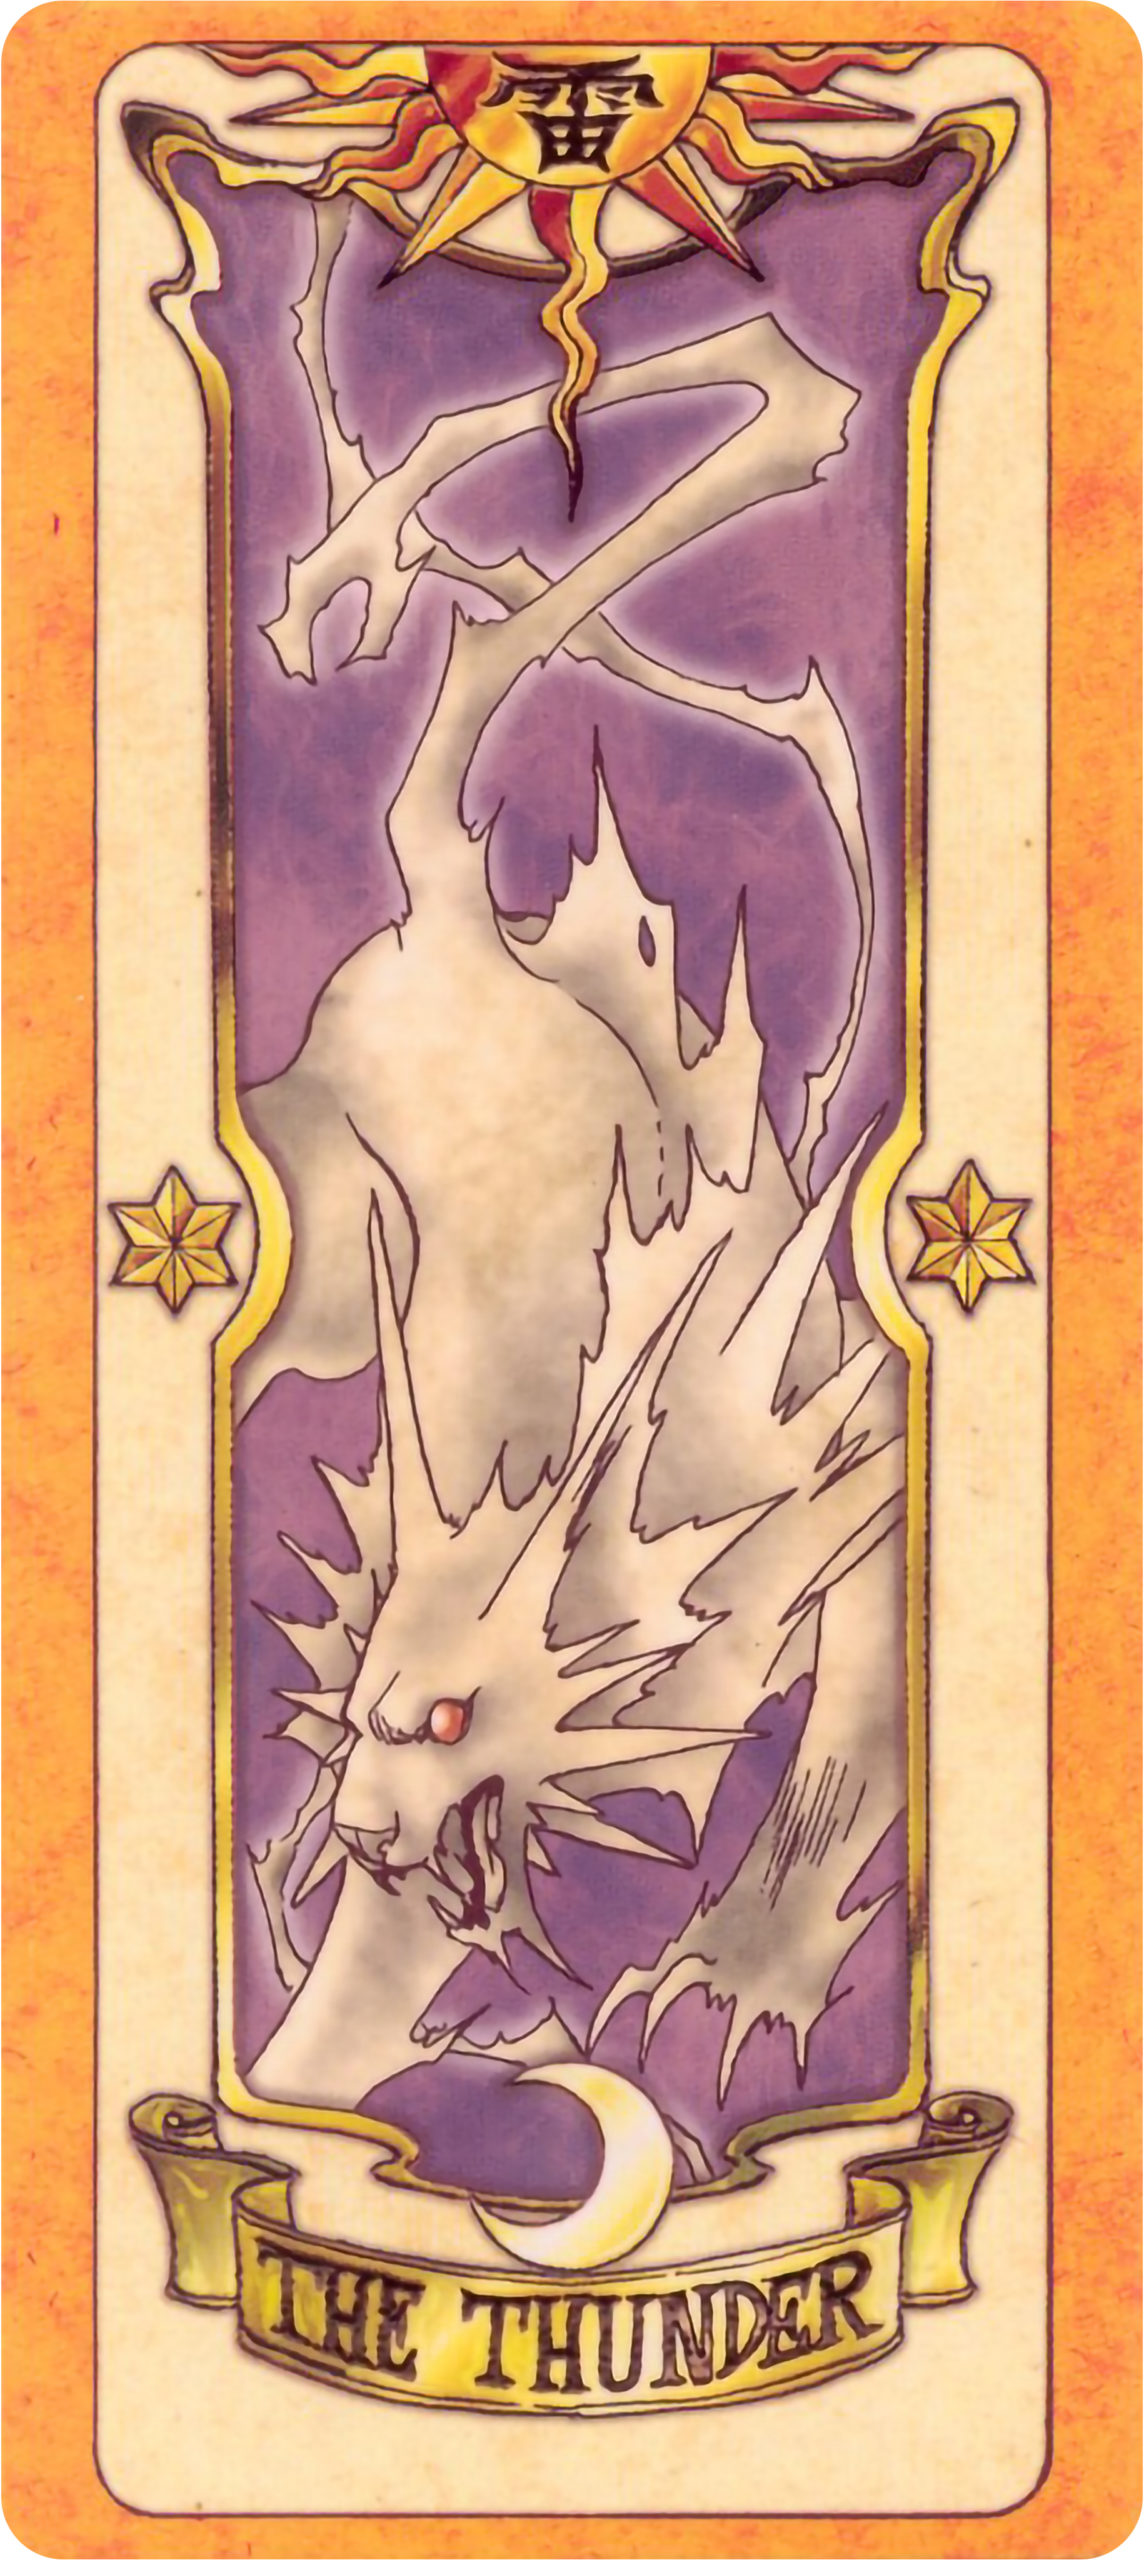 The Thunder Clow Card. (Image: CLAMP)